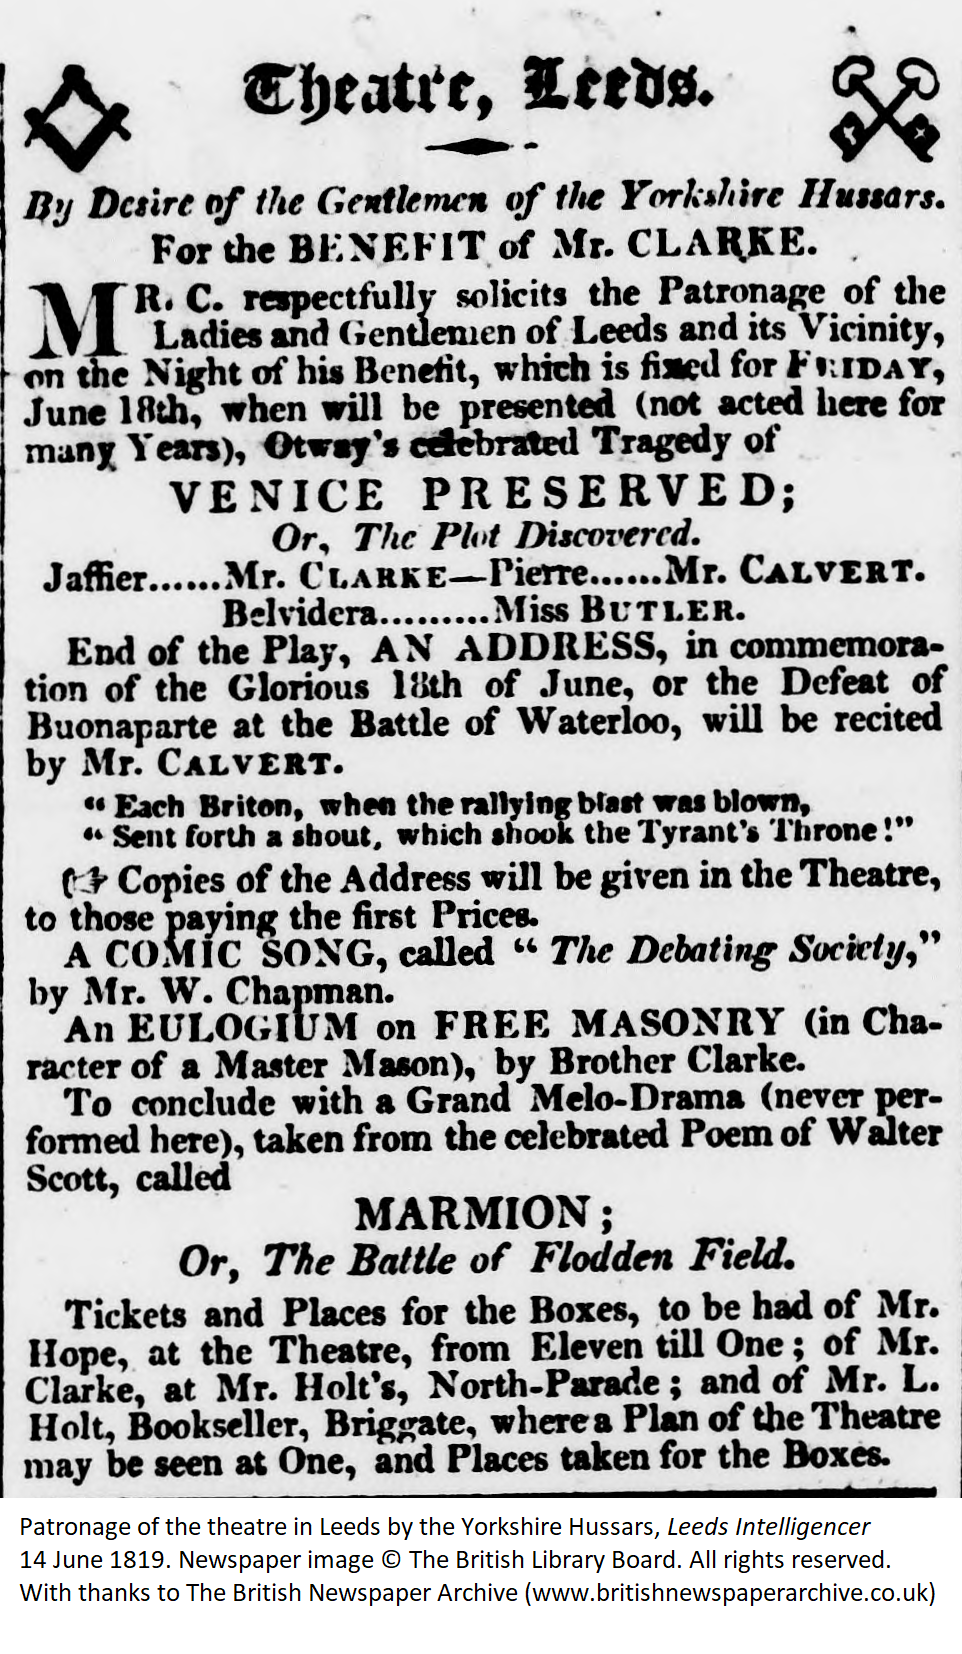 Patronage of the theatre in Leeds by the Yorkshire Hussars, Leeds Intelligencer 14 June 1819. Newspaper image © The British Library Board. All rights reserved. With thanks to The British Newspaper Archive (www.britishnewspaperarchive.co.uk)